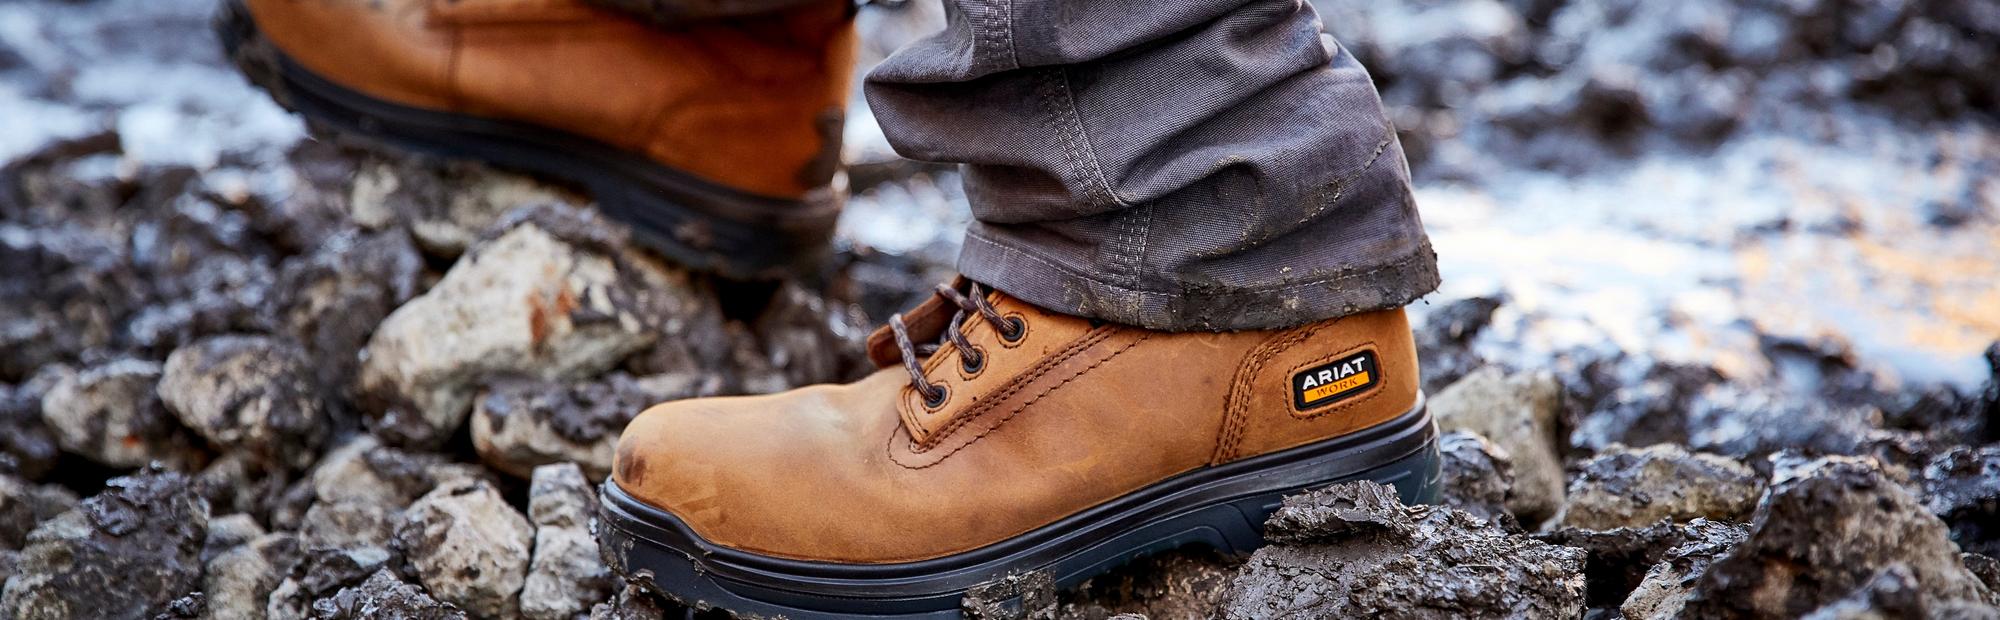 What are the Lightest Work Boots?